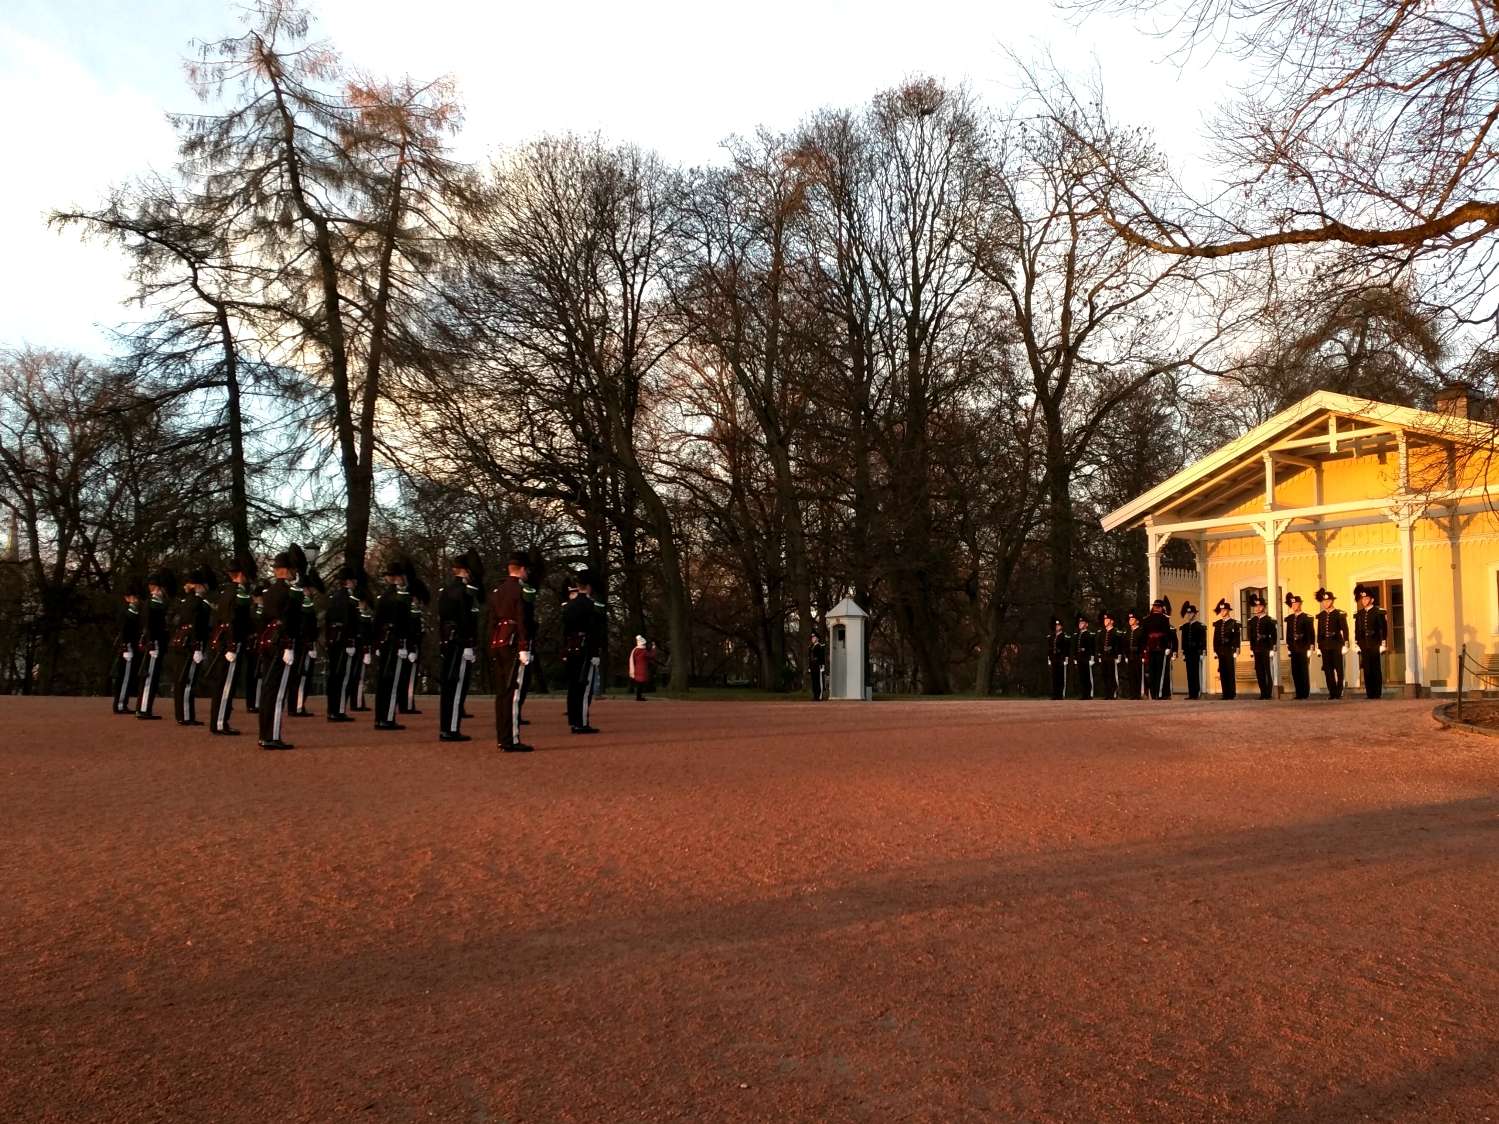 The changing of the guards at the Royal Palace in Oslo, Norway